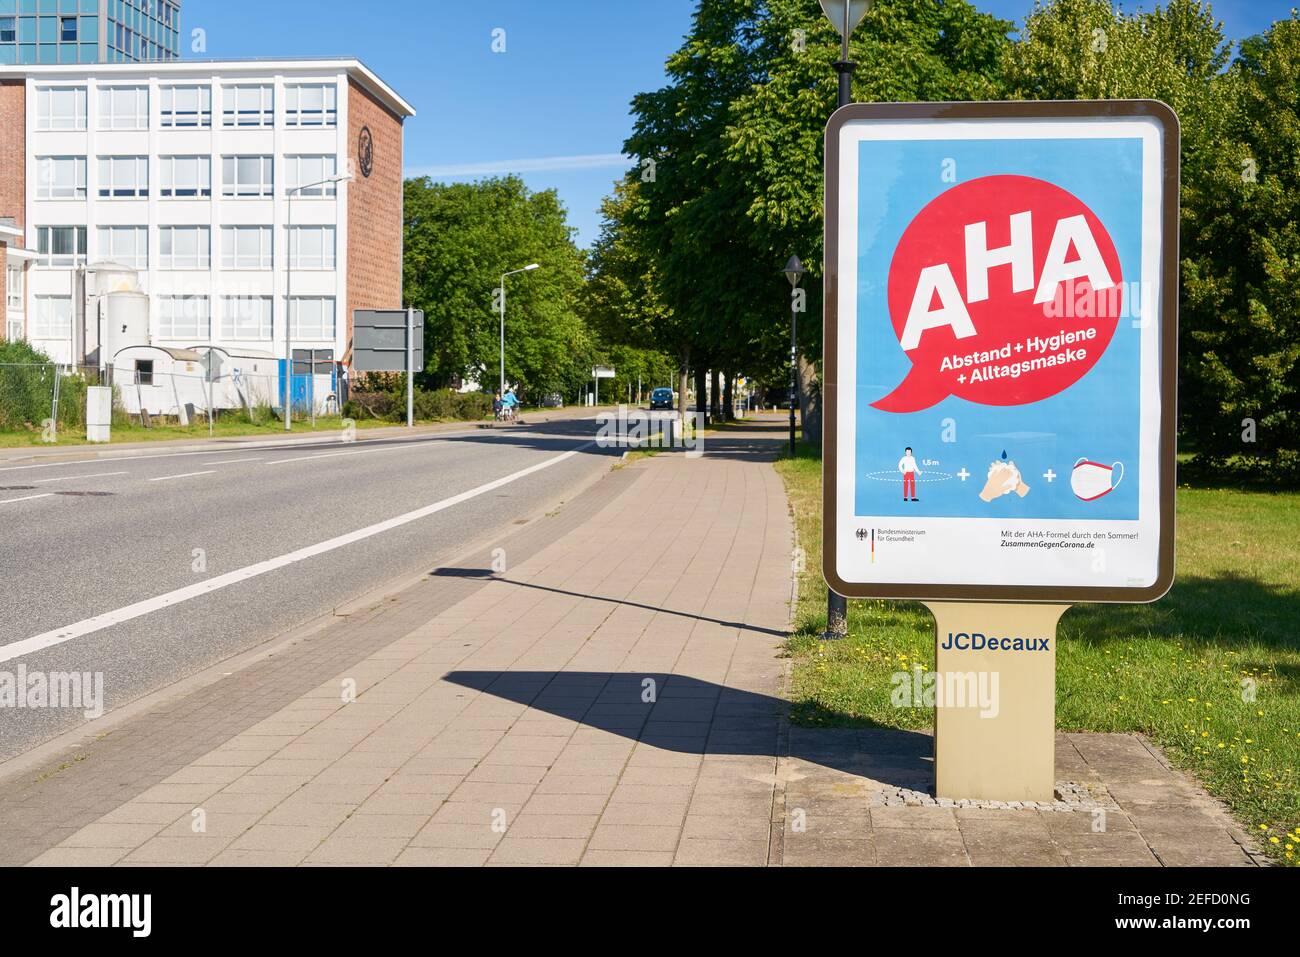 WARNEMUENDE, Germany, July 2020: Billdboard with German AHA (Abstand, Hygiene, Alltagsmaske) rules (meaning distancing, hygiene, face mask) against sp Stock Photo